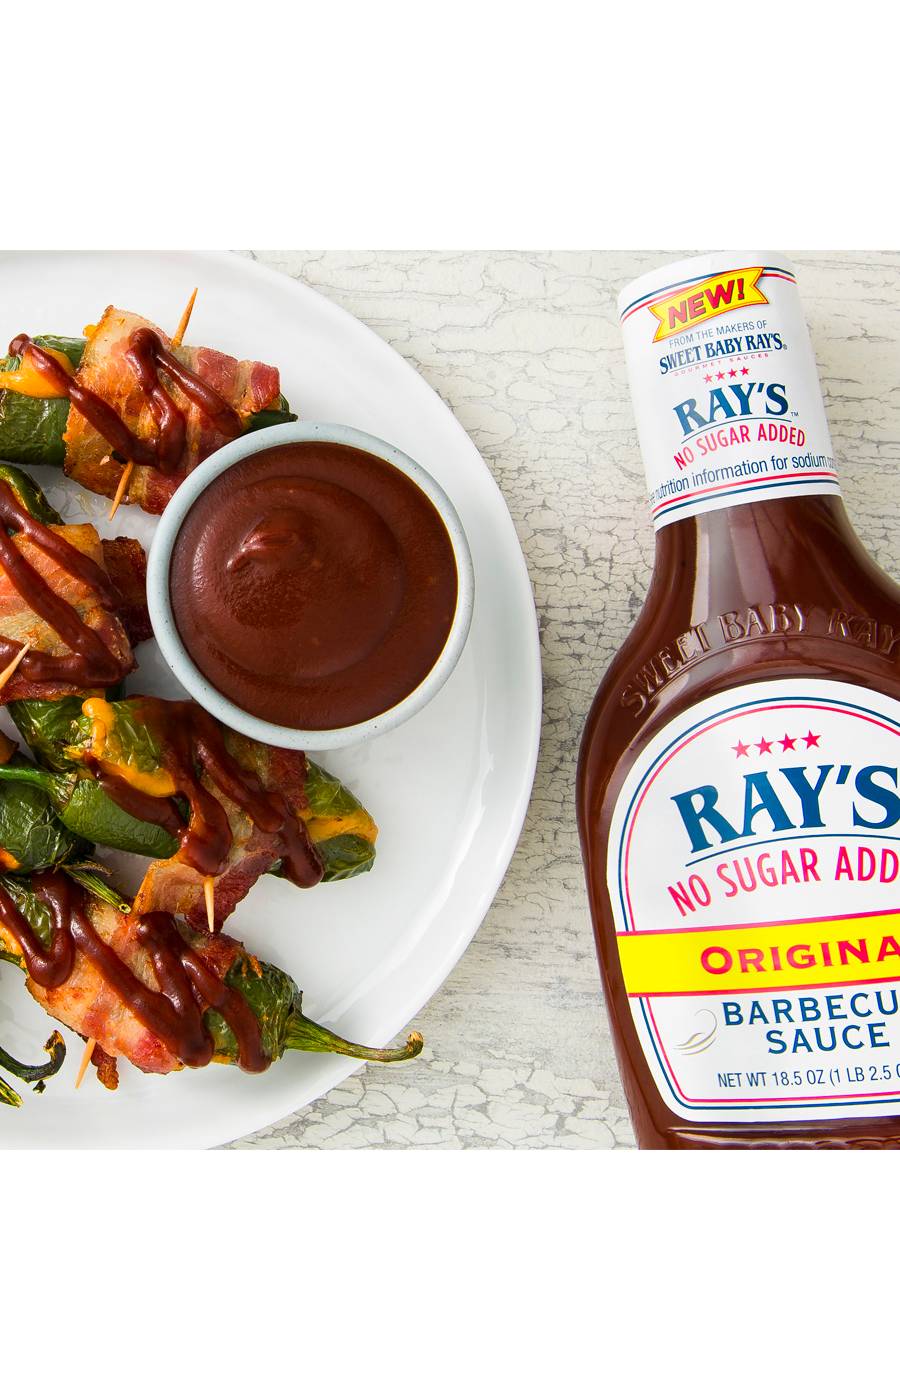 Sweet Baby Ray's No Sugar Added Original Barbecue Sauce; image 2 of 4